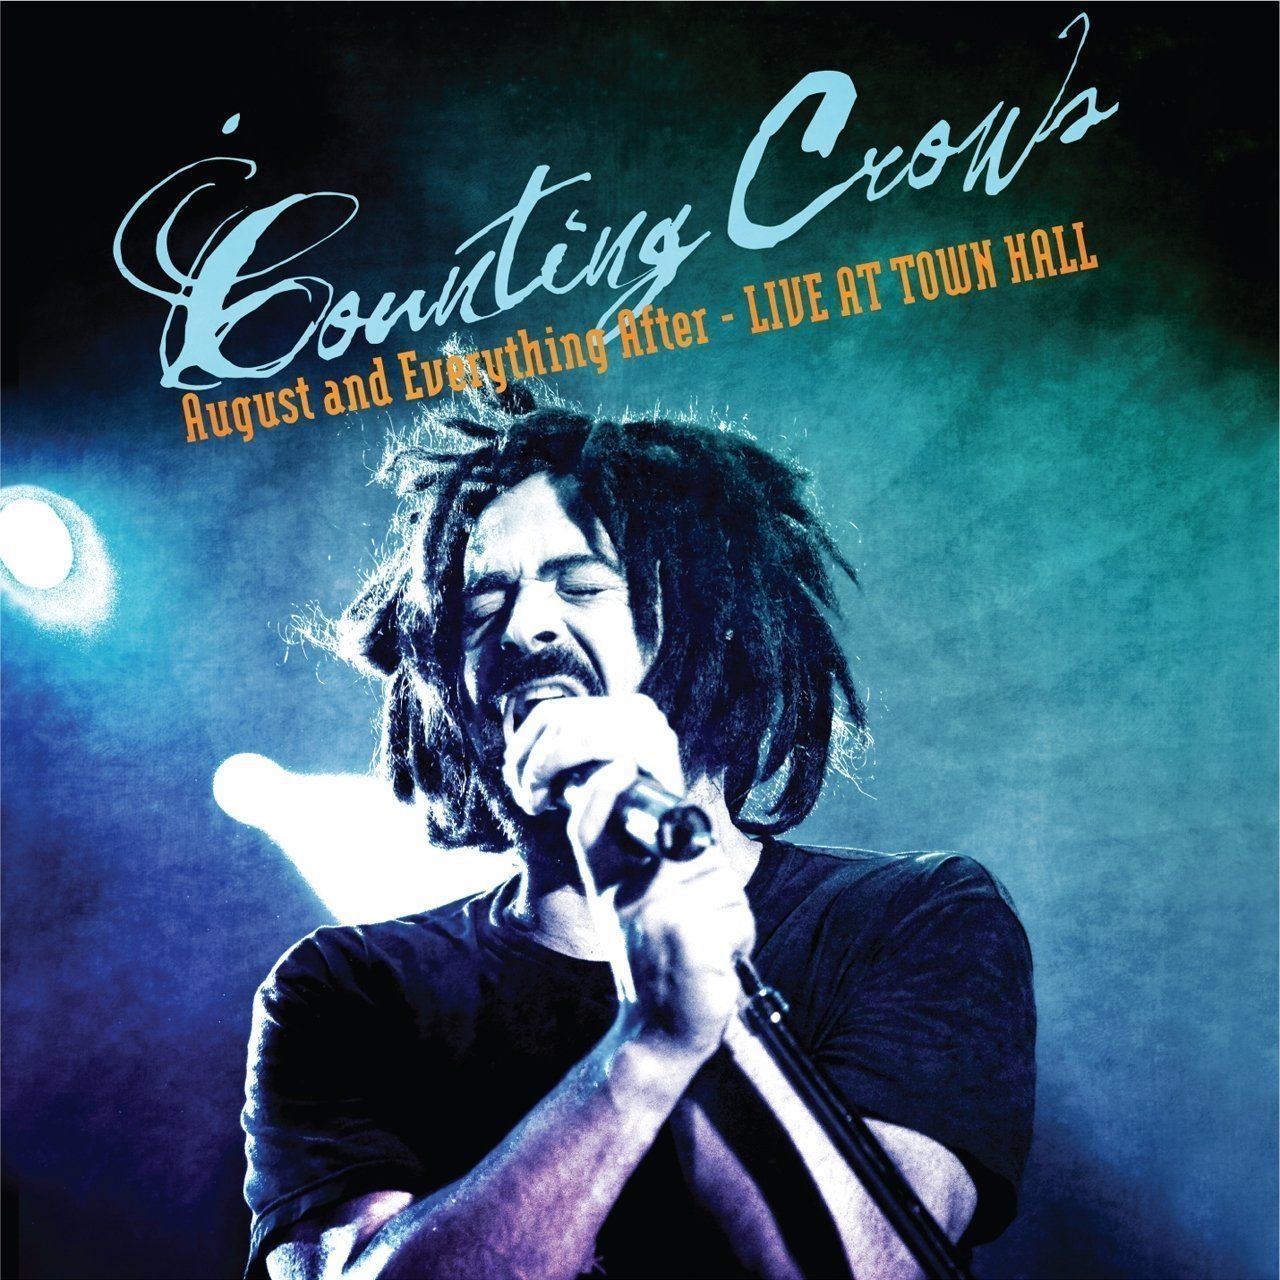 Disco de vinil Counting Crows - August & Everything After Live From Town Hall (2 LP)